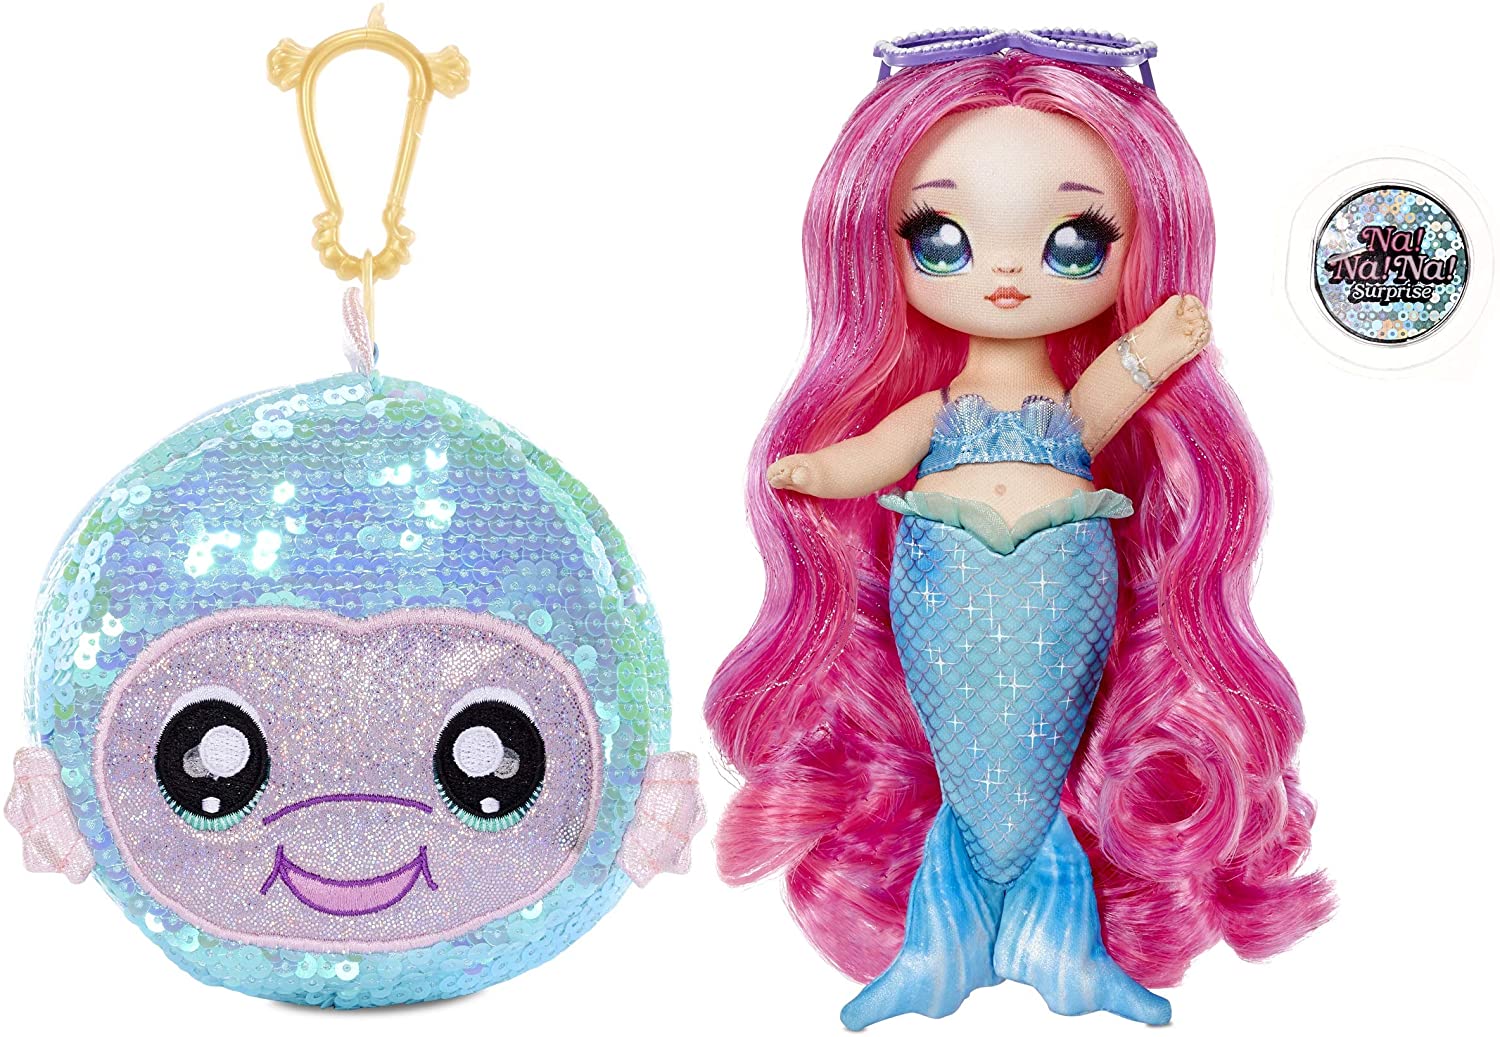 Na! Na! Na! Surprise 2-in-1 Fashion Doll and Sparkly Sequined Purse Sparkle Series – Marina Jewels, 7.5″ Mermaid Doll